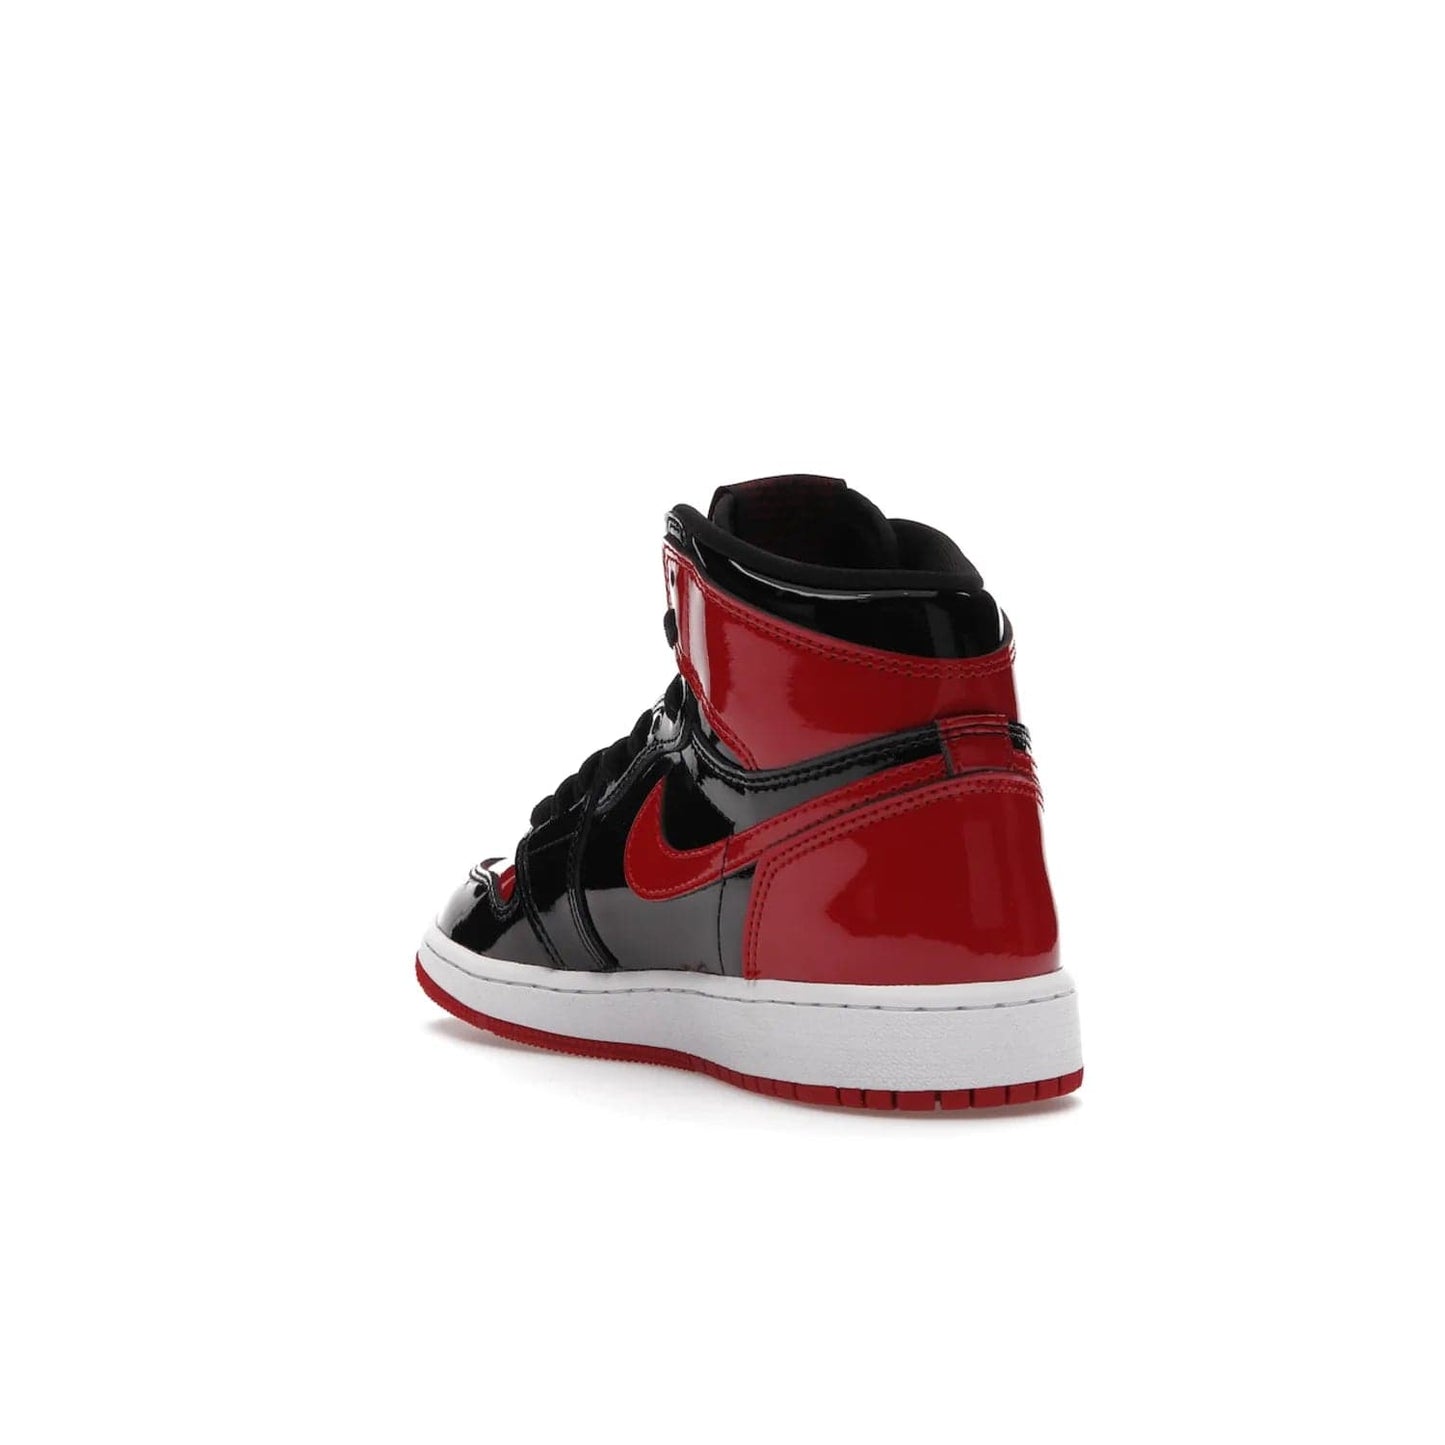 Jordan 1 Retro High OG Patent Bred (GS) - Image 25 - Only at www.BallersClubKickz.com - Upgrade your sneaker game with the iconic Air Jordan 1 Retro High OG Bred Patent GS. Crafted with premium patent leather and basketball-inspired details for a classic look, they also feature an encapsulated Air-sole cushioning and enhanced red rubber outsole. Don't miss this timeless sneaker with a striking black, white, and varsity red colorway, dropping December 2021.